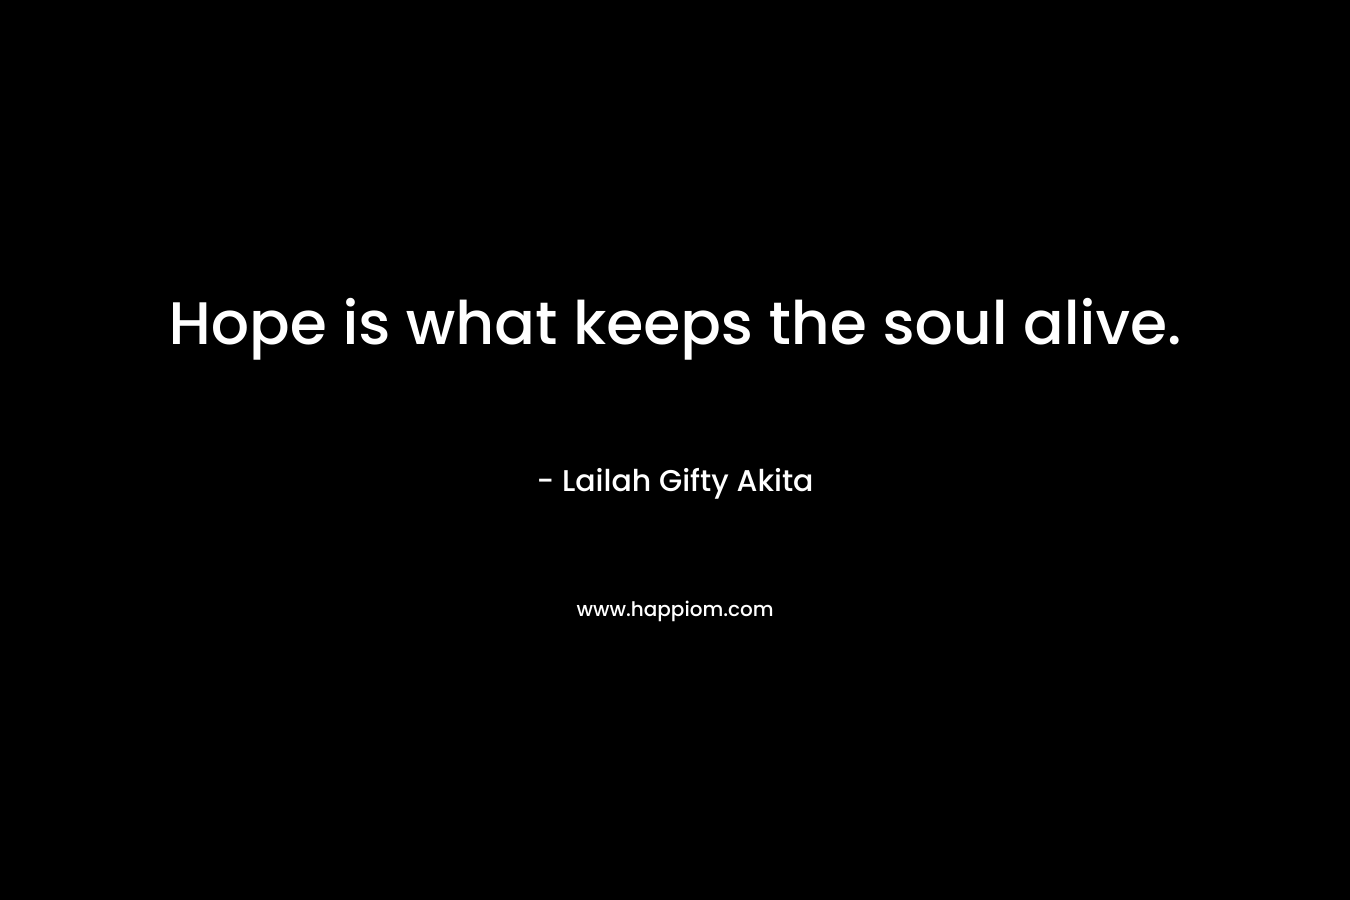 Hope is what keeps the soul alive.